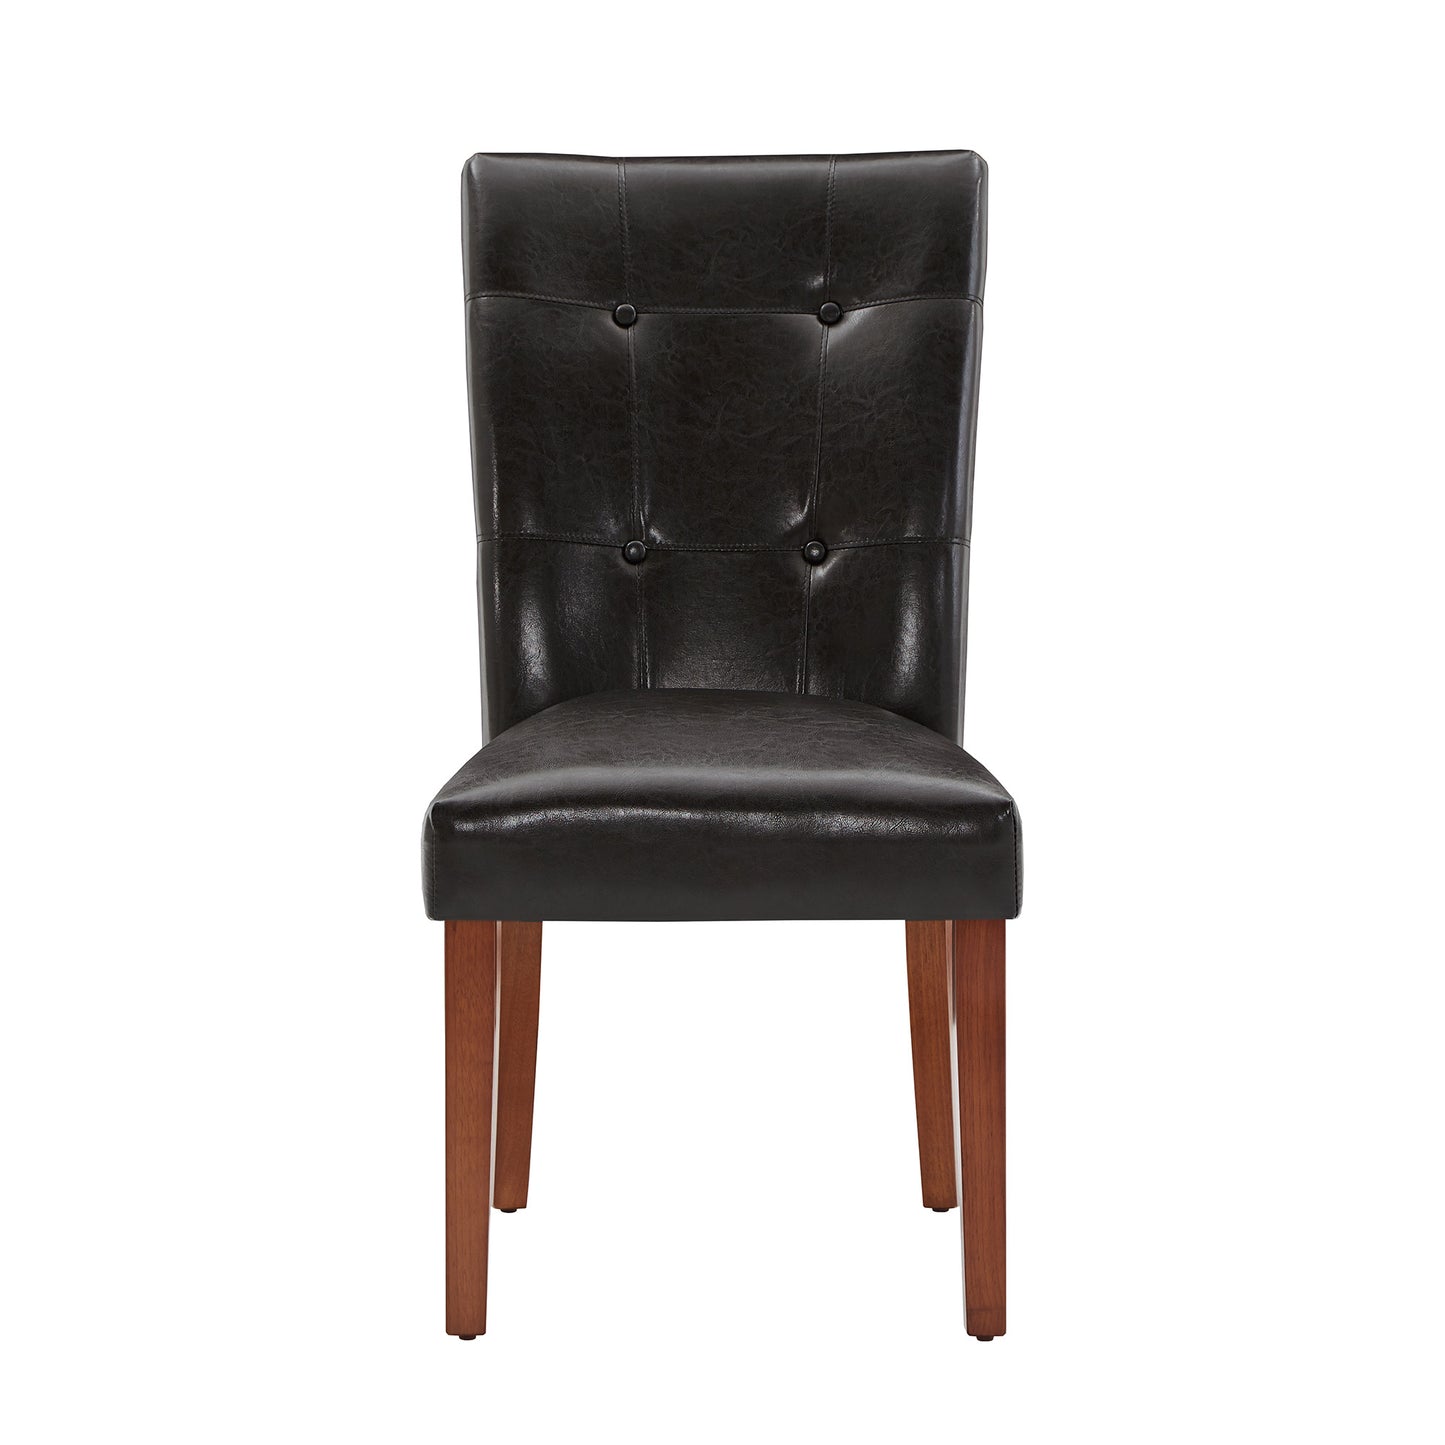 Tufted Faux Leather Dining Chairs (Set of 2) - Dark Brown Faux Leather